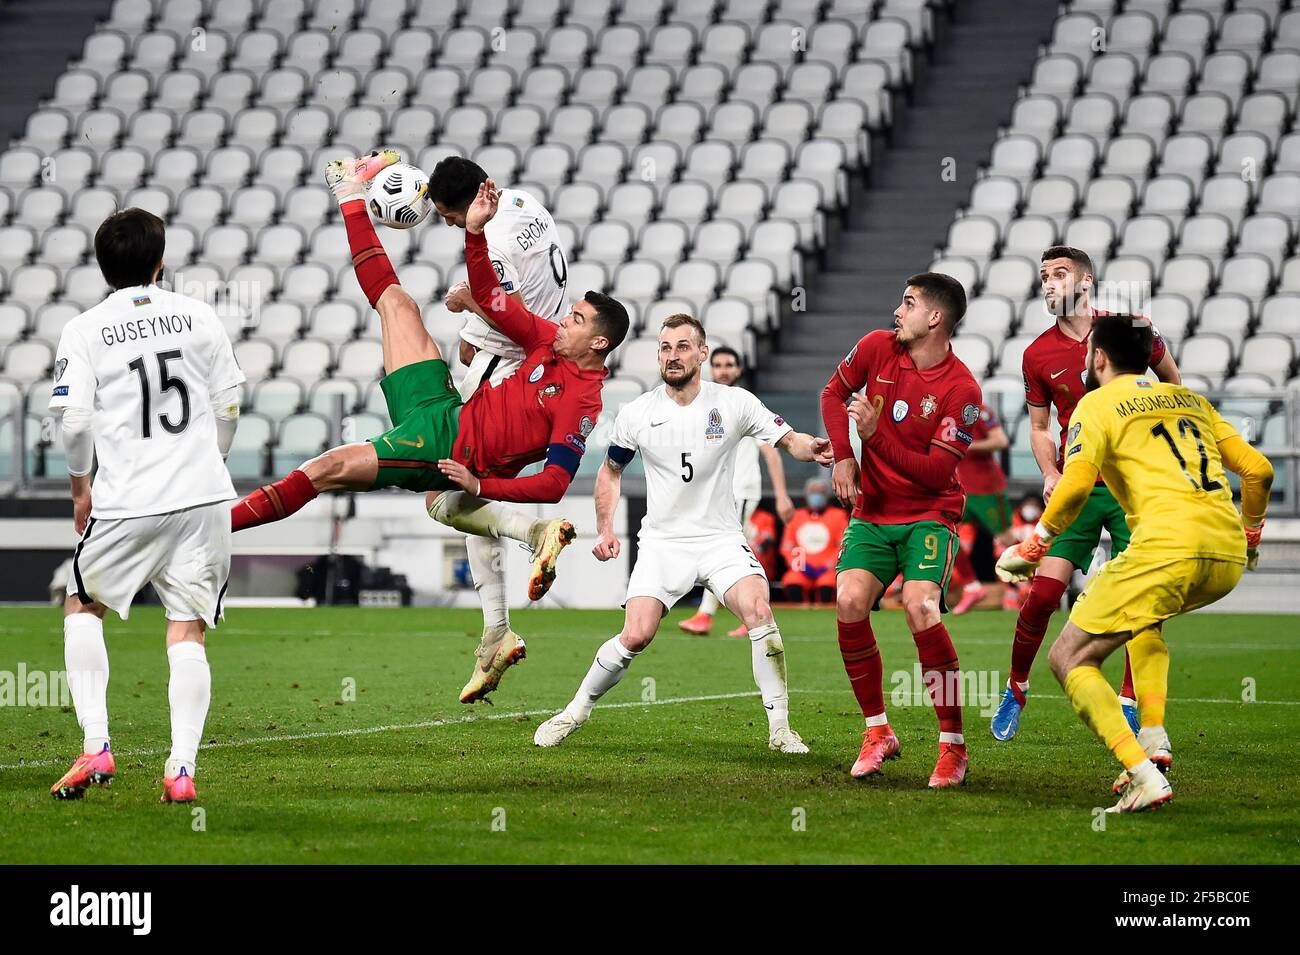 Turin, Italy - 24 March, 2021: Cristiano Ronaldo (C) of Portugal attempts a bicycle kick during the FIFA World Cup 2022 Qatar qualifying football match between Portugal and Azerbaijan. Portugal face Azerbaijan at a neutral venue in Turin behind closed doors to prevent the spread of Covid-19 variants. Portugal won 1-0 over Azerbaijan. Credit: Nicolò Campo/Alamy Live News Stock Photo